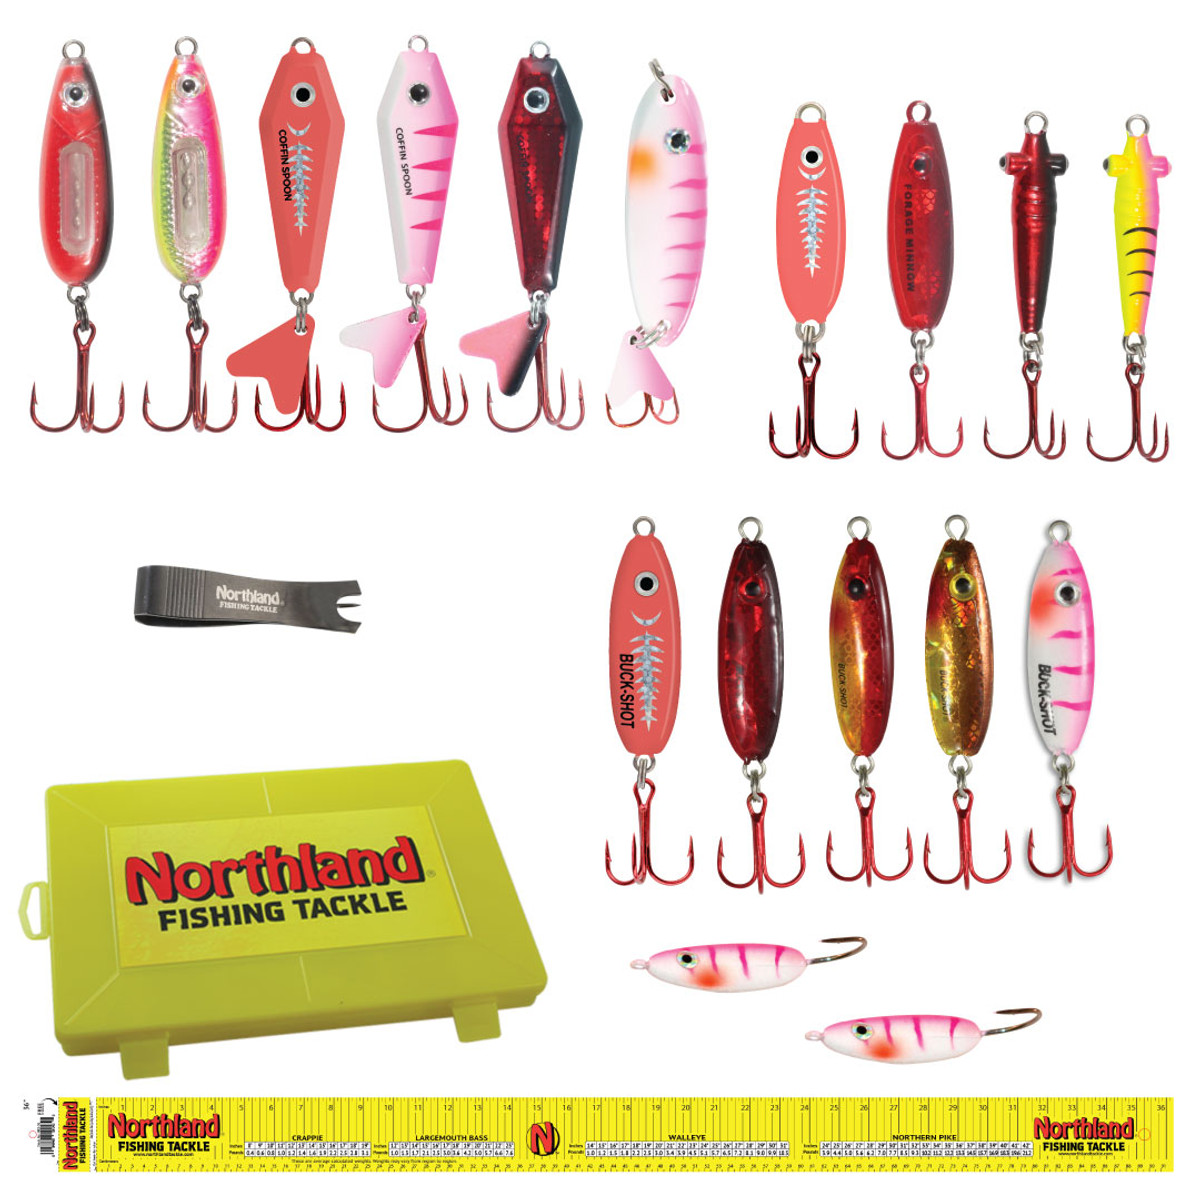 7 Must-Have Fishing Tackle Items for a Successful Day on the Lake